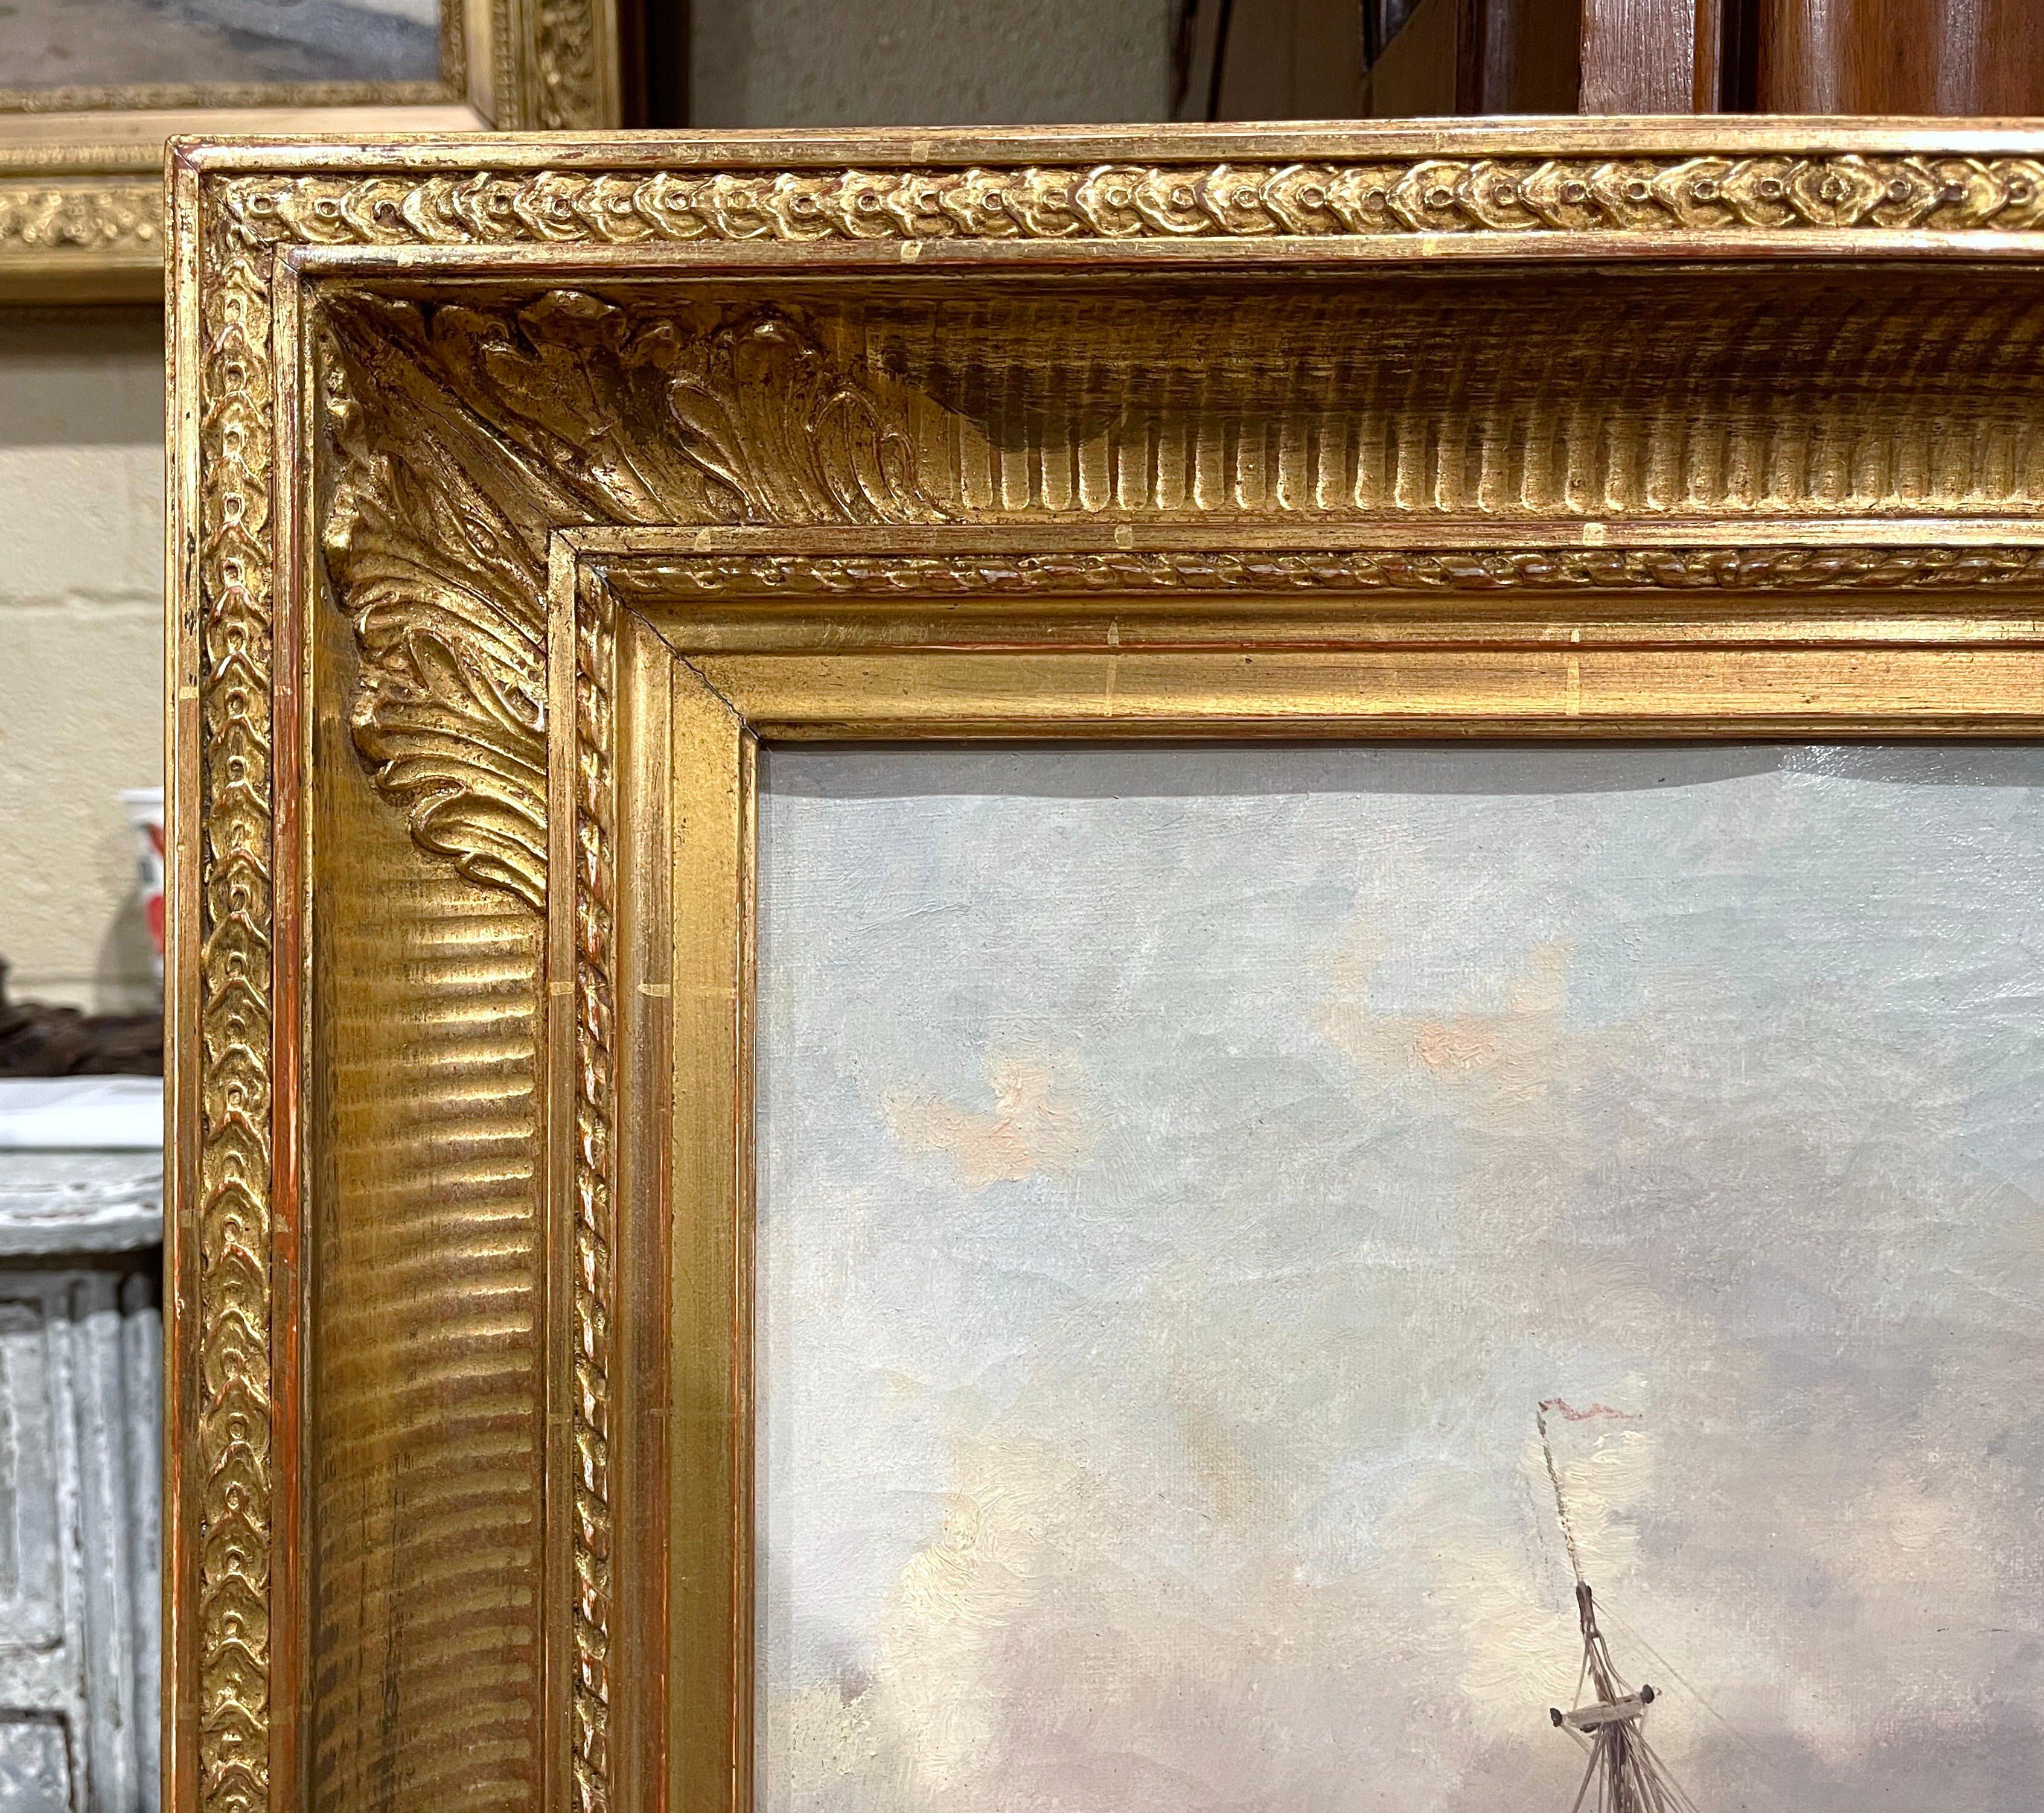 19th Century Oil on Canvas Ship Painting Signed E. Dupuy for E. Galien-Laloue 1